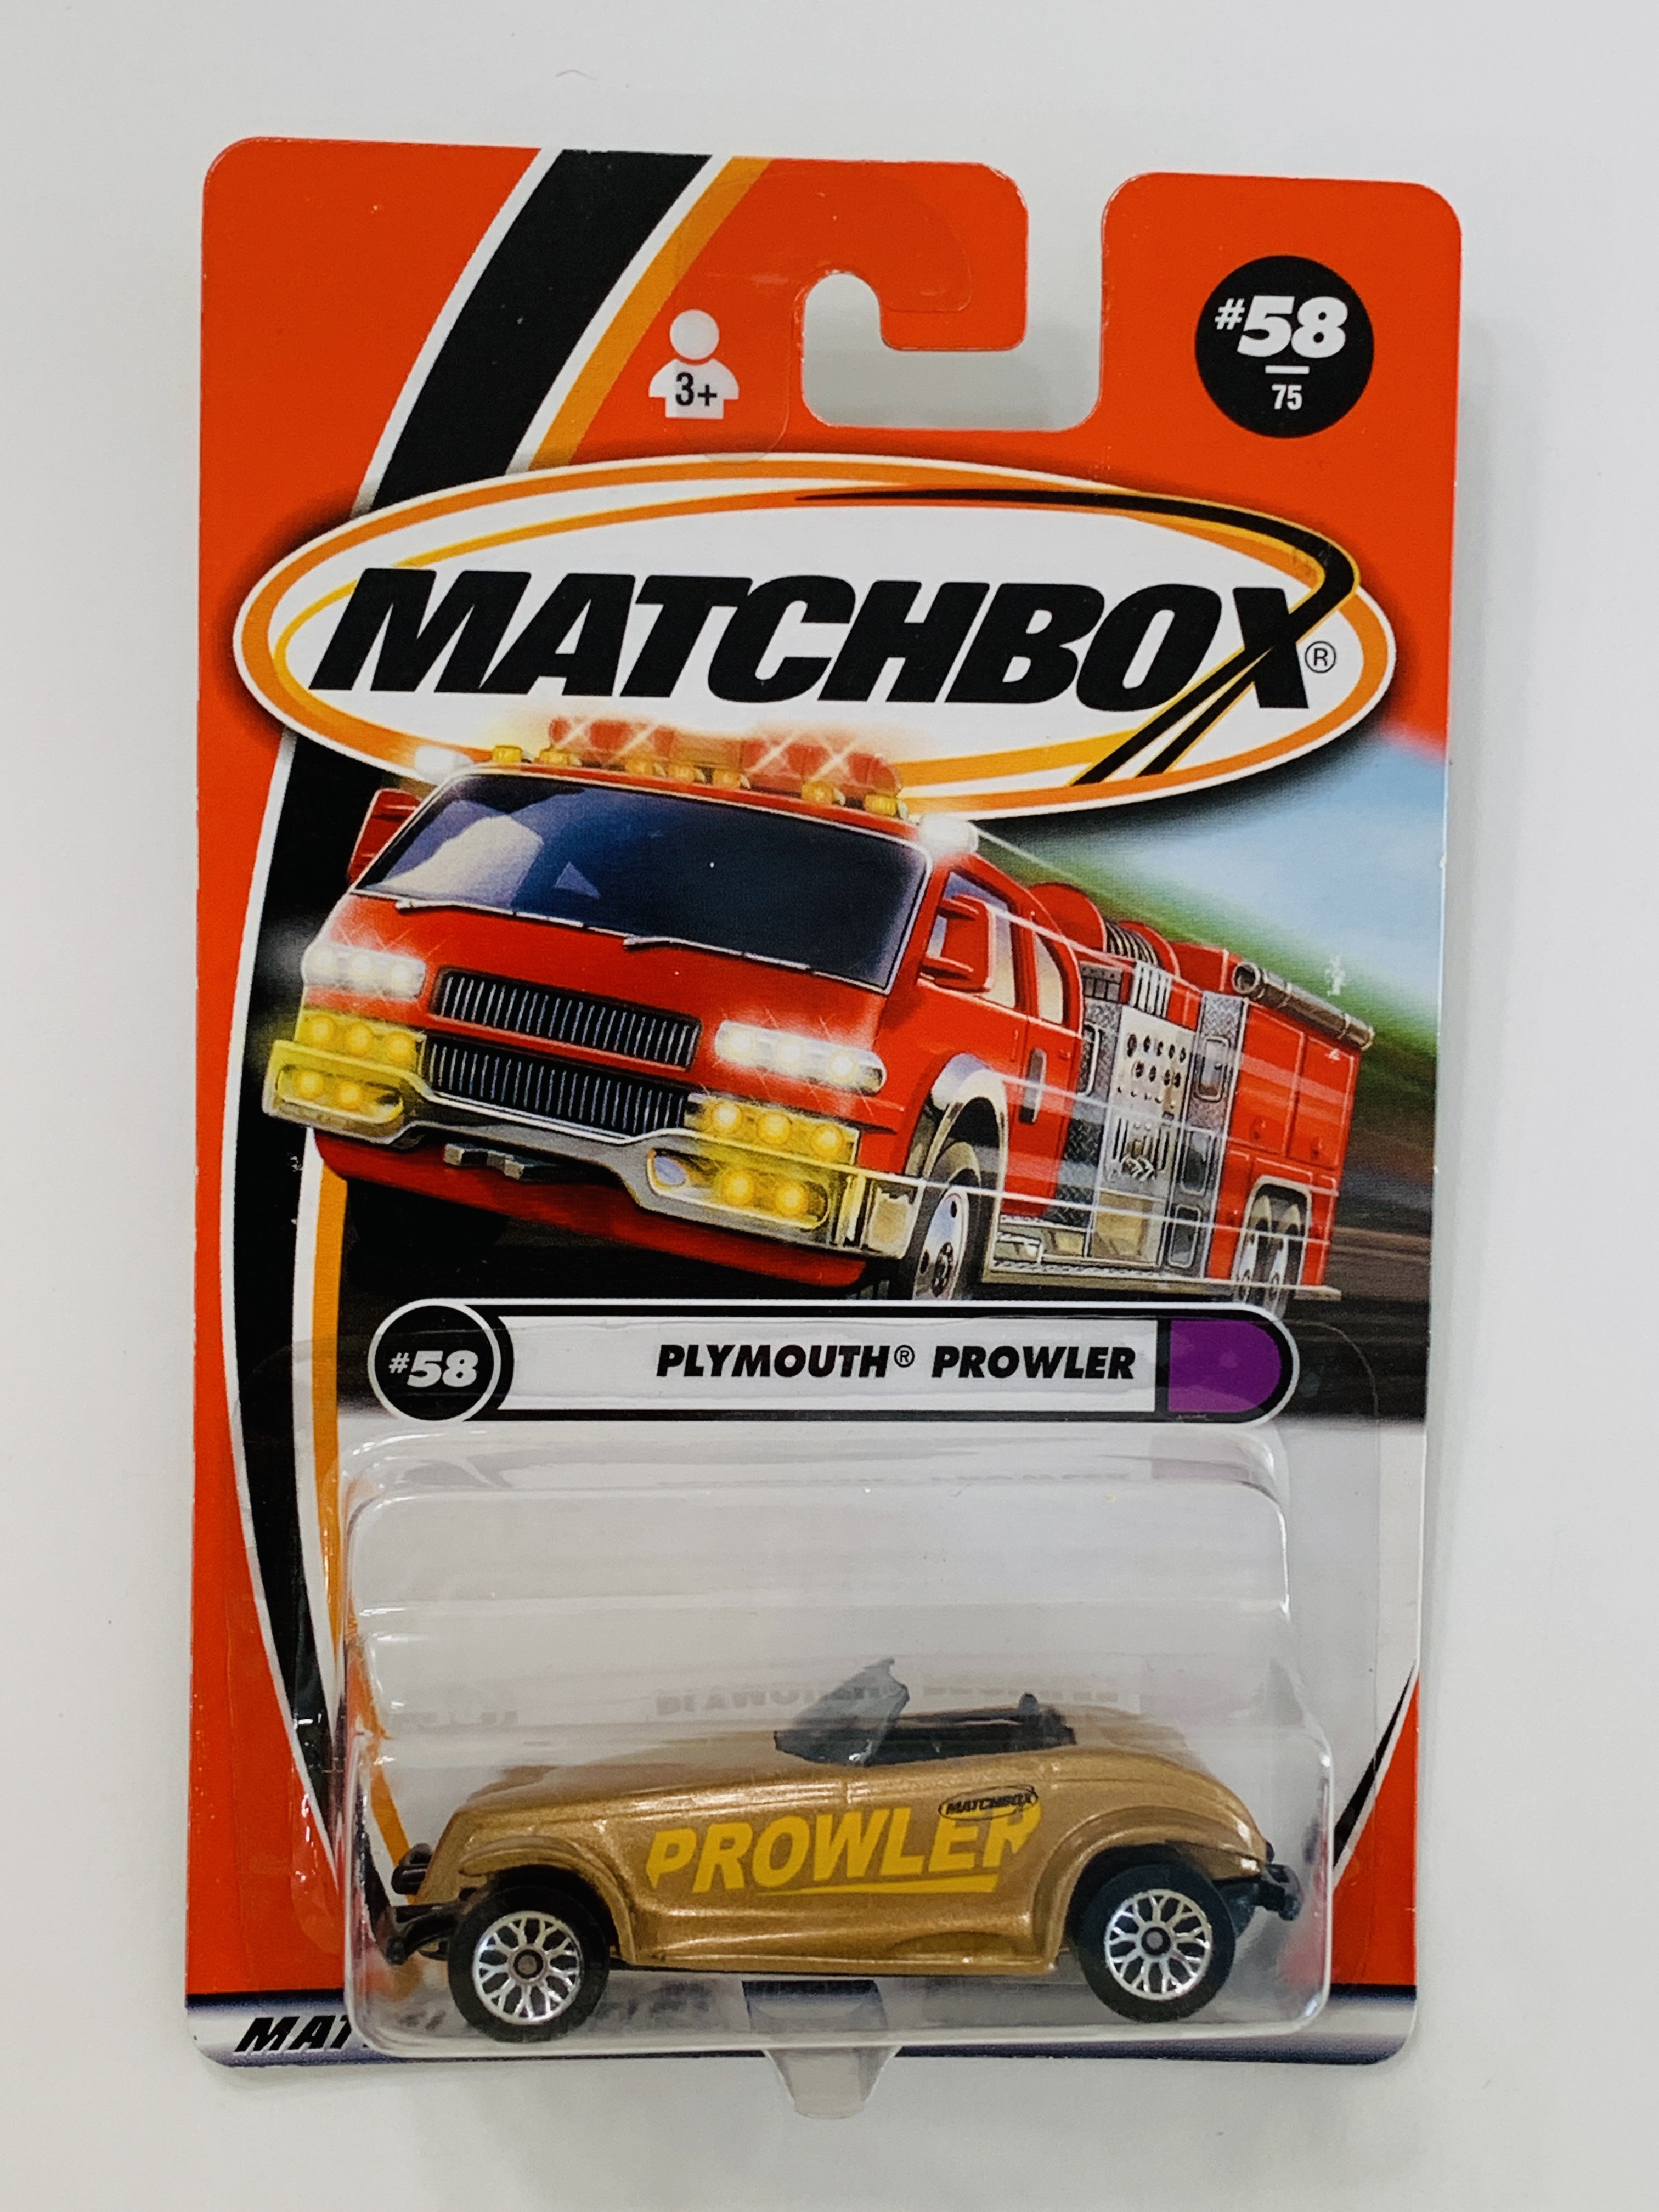 Matchbox #58 Plymouth Prowler